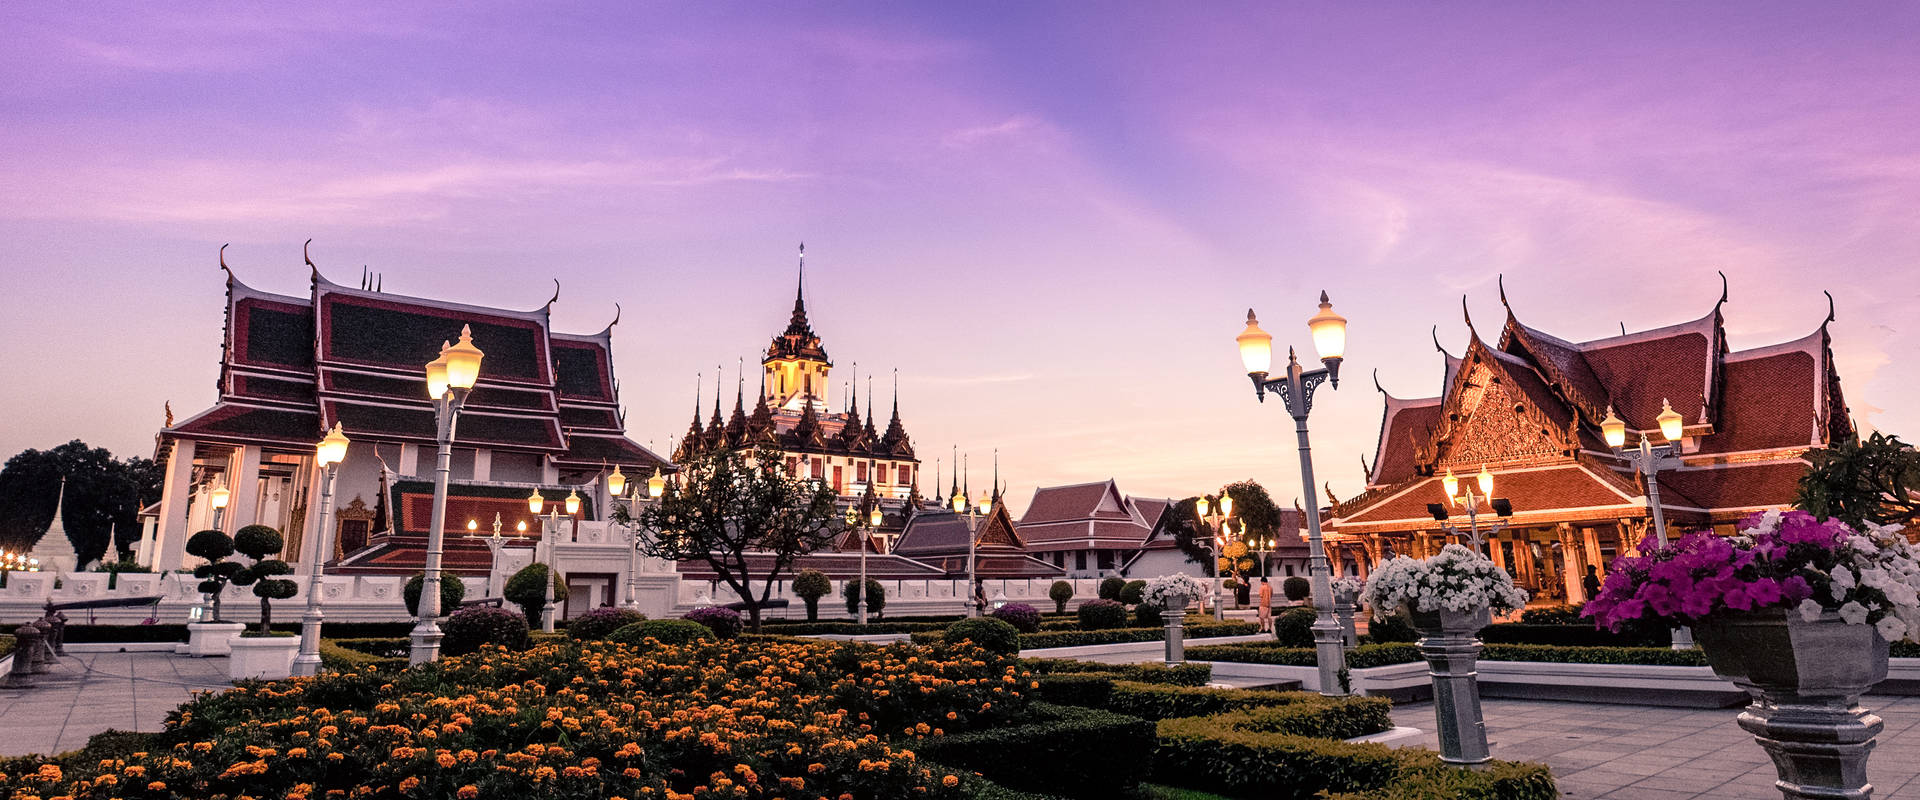 Majestic Royal Pavilion in Thailand Wallpaper